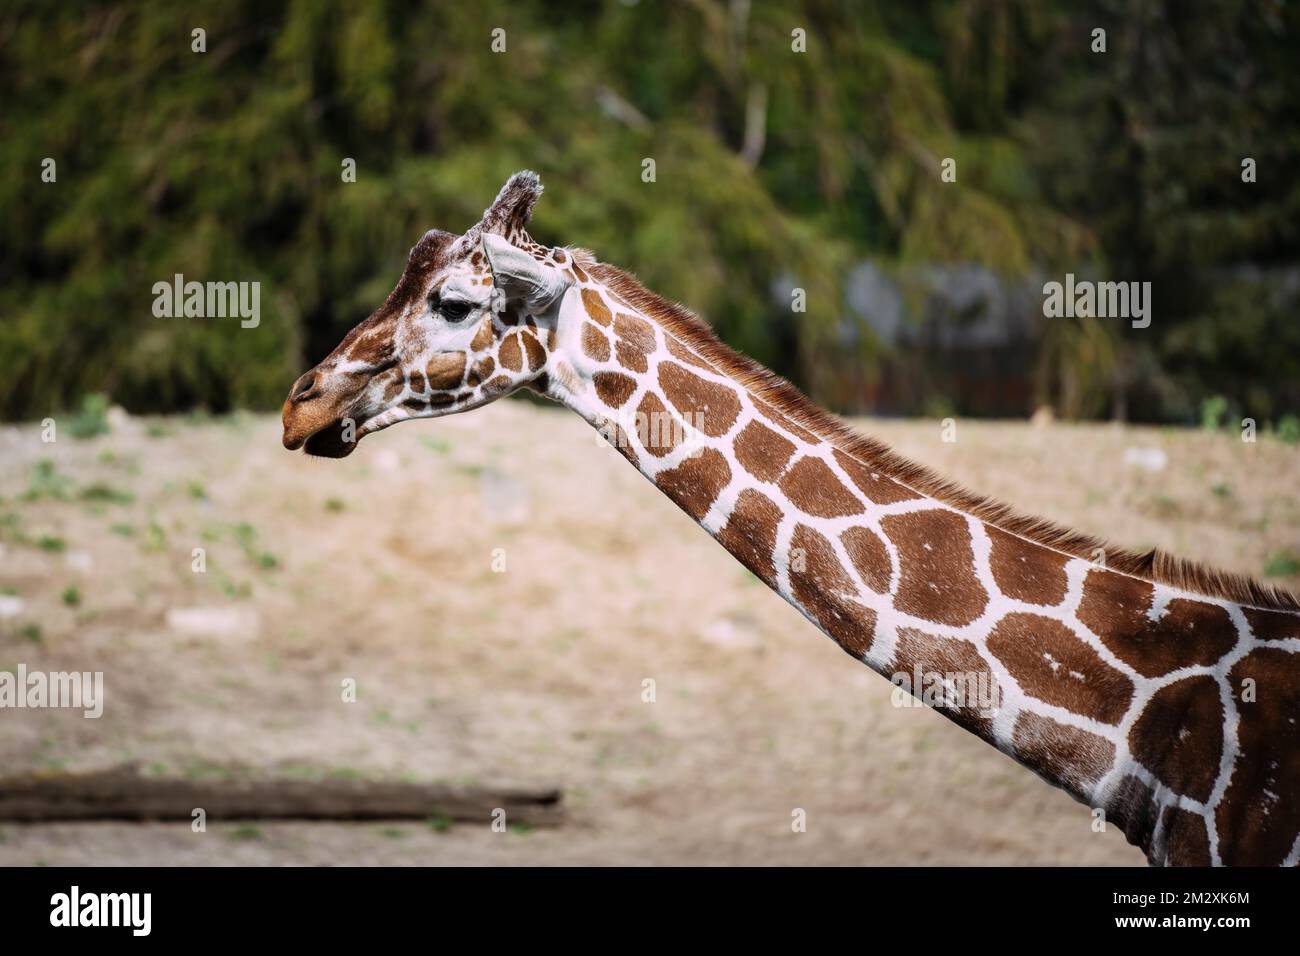 Girafe (girafe), tête avec cou, profil, captive, Wroclaw, Pologne Banque D'Images